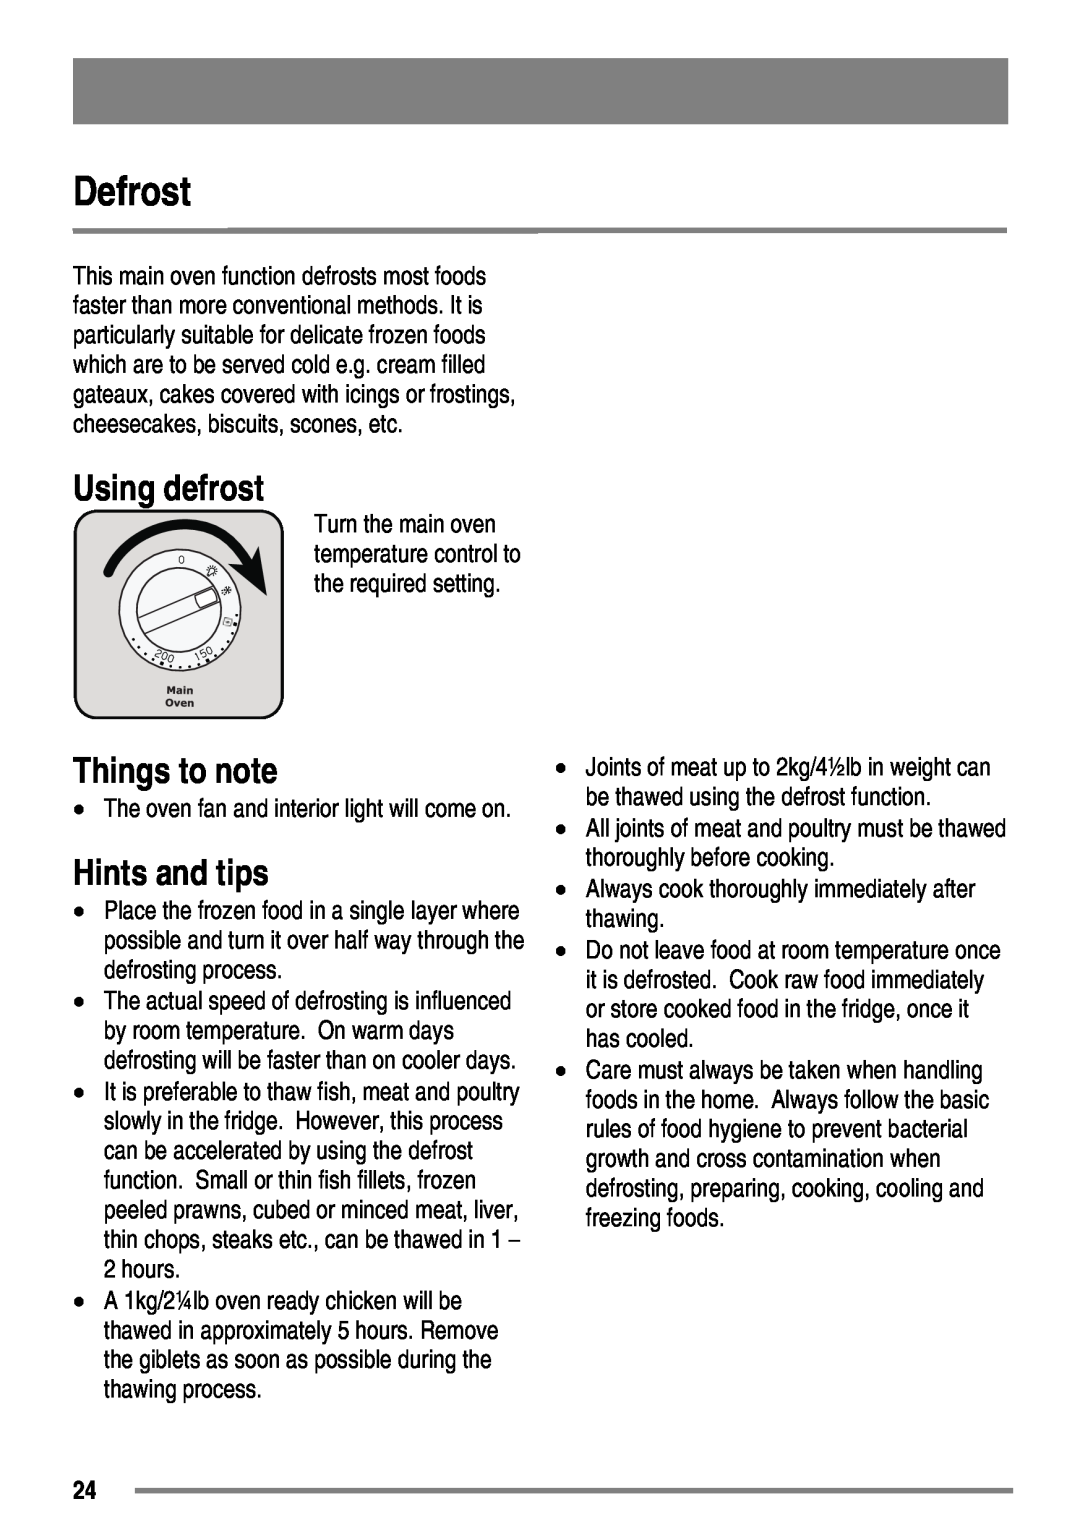 Zanussi ZKC6040 user manual Defrost, Using defrost, Things to note, Hints and tips 